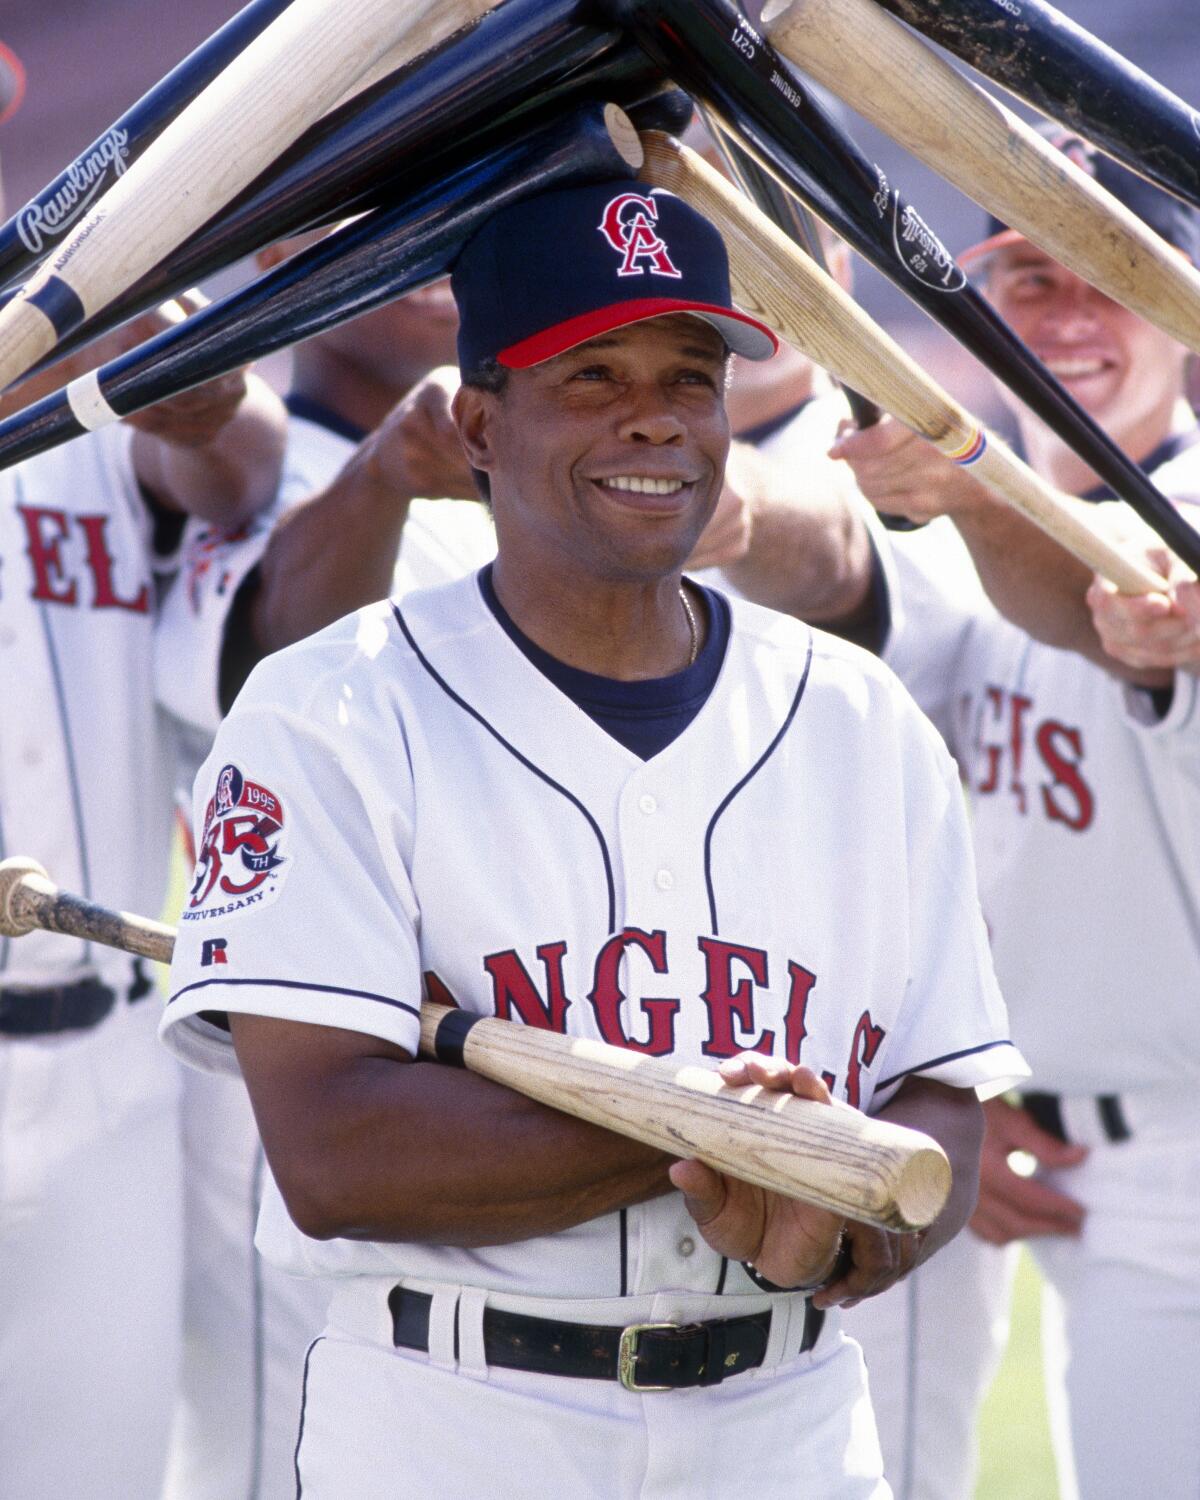 Angels hitting coach Rod Carew is surrounded by bats and poses for photographs before a game in May 1995.